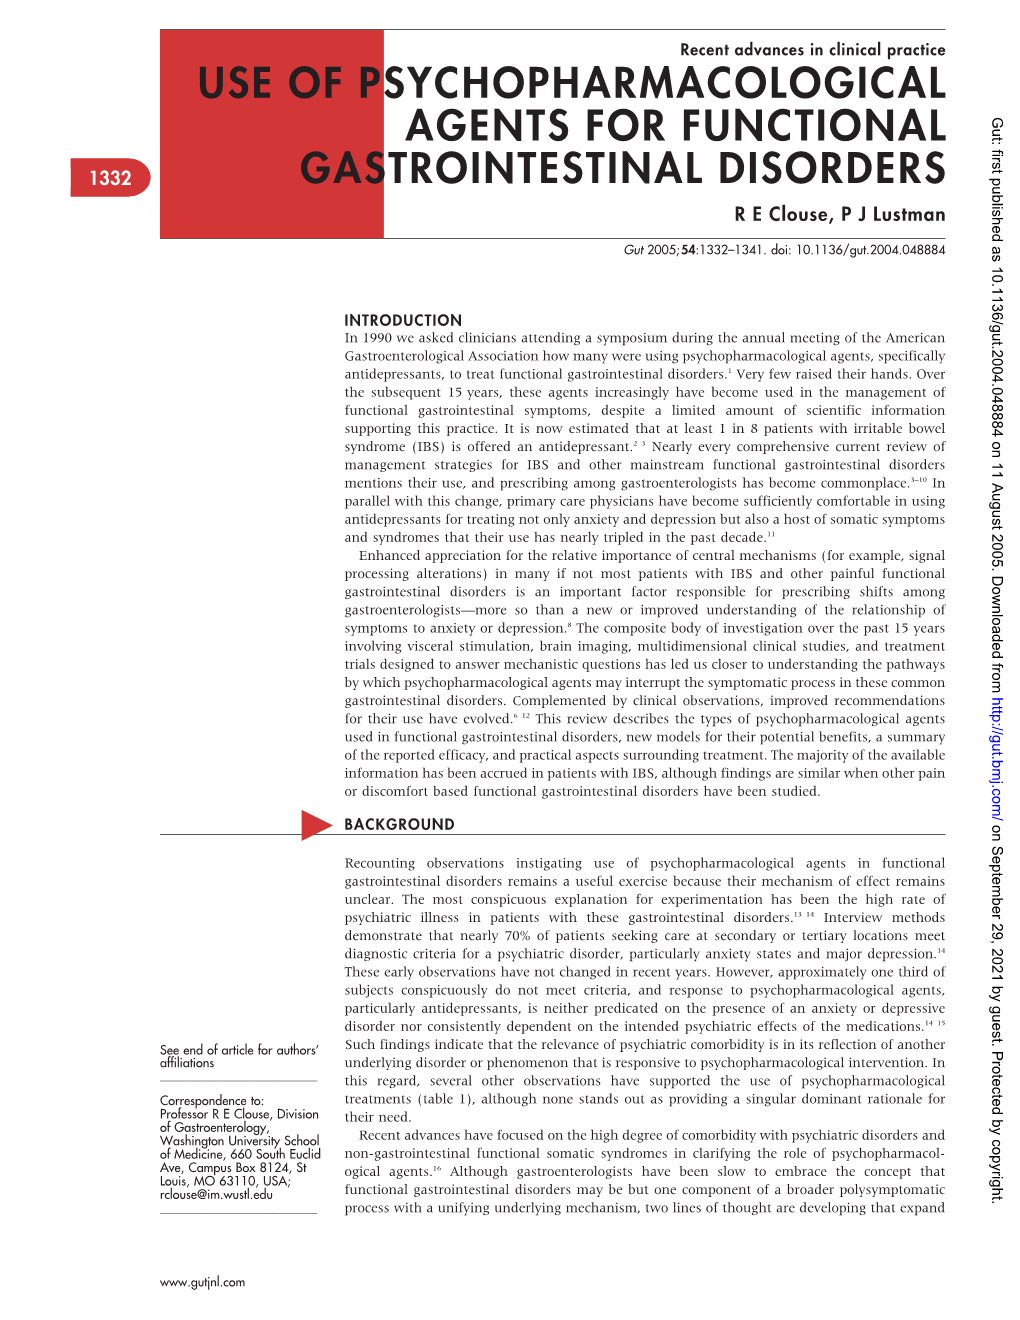 Use of Psychopharmacological Agents for Functional Gastrointestinal